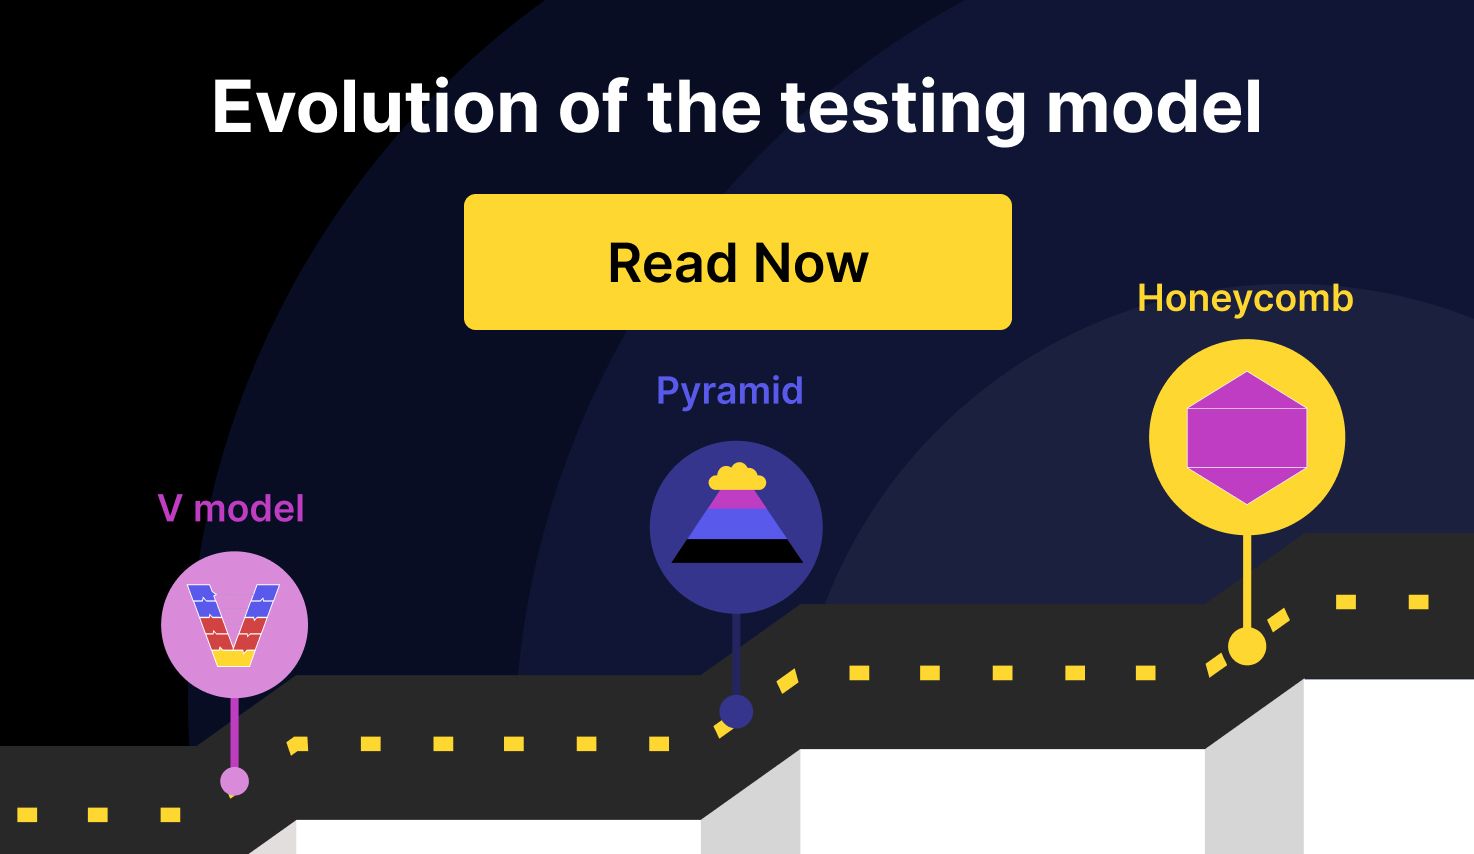 The future of software testing models